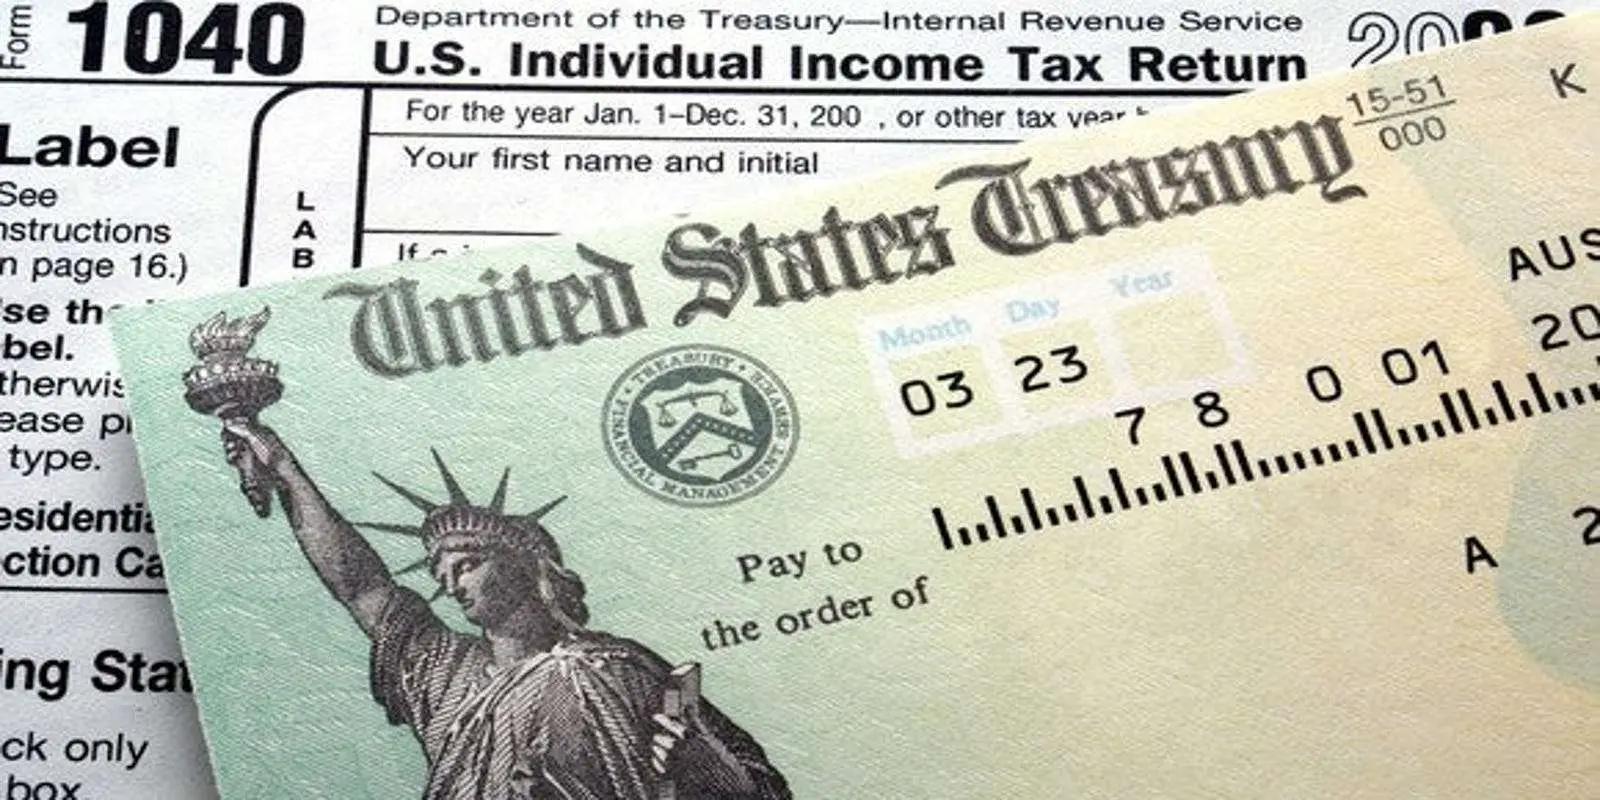 Stimulus checks: IRS unveils new website to sign up for payments